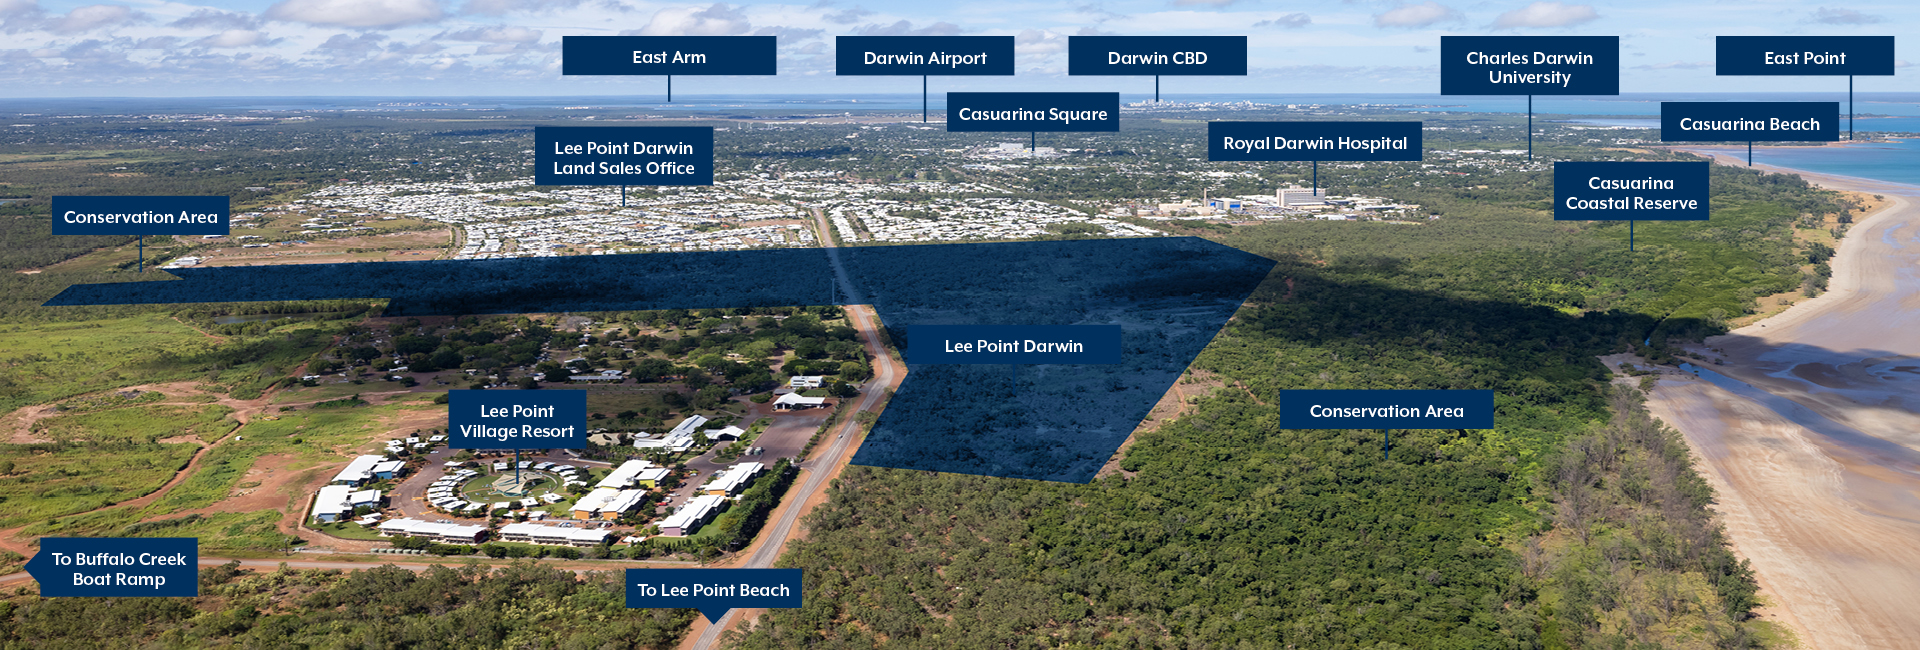 Aerial show of the development with overlay graphics pointing to amenities of interest in the nearby suburbs. These include Casuarina Coastal Reserve, East Point, Casuarina Beach, Casuarina Square, Charles Darwin University, Royal Darwin Hospital, Darwin CBD, Darwin Airport, East Arm, Lee Point Village Resort, Lee Point Beach, and Buffalo Creek Boat Ramp.